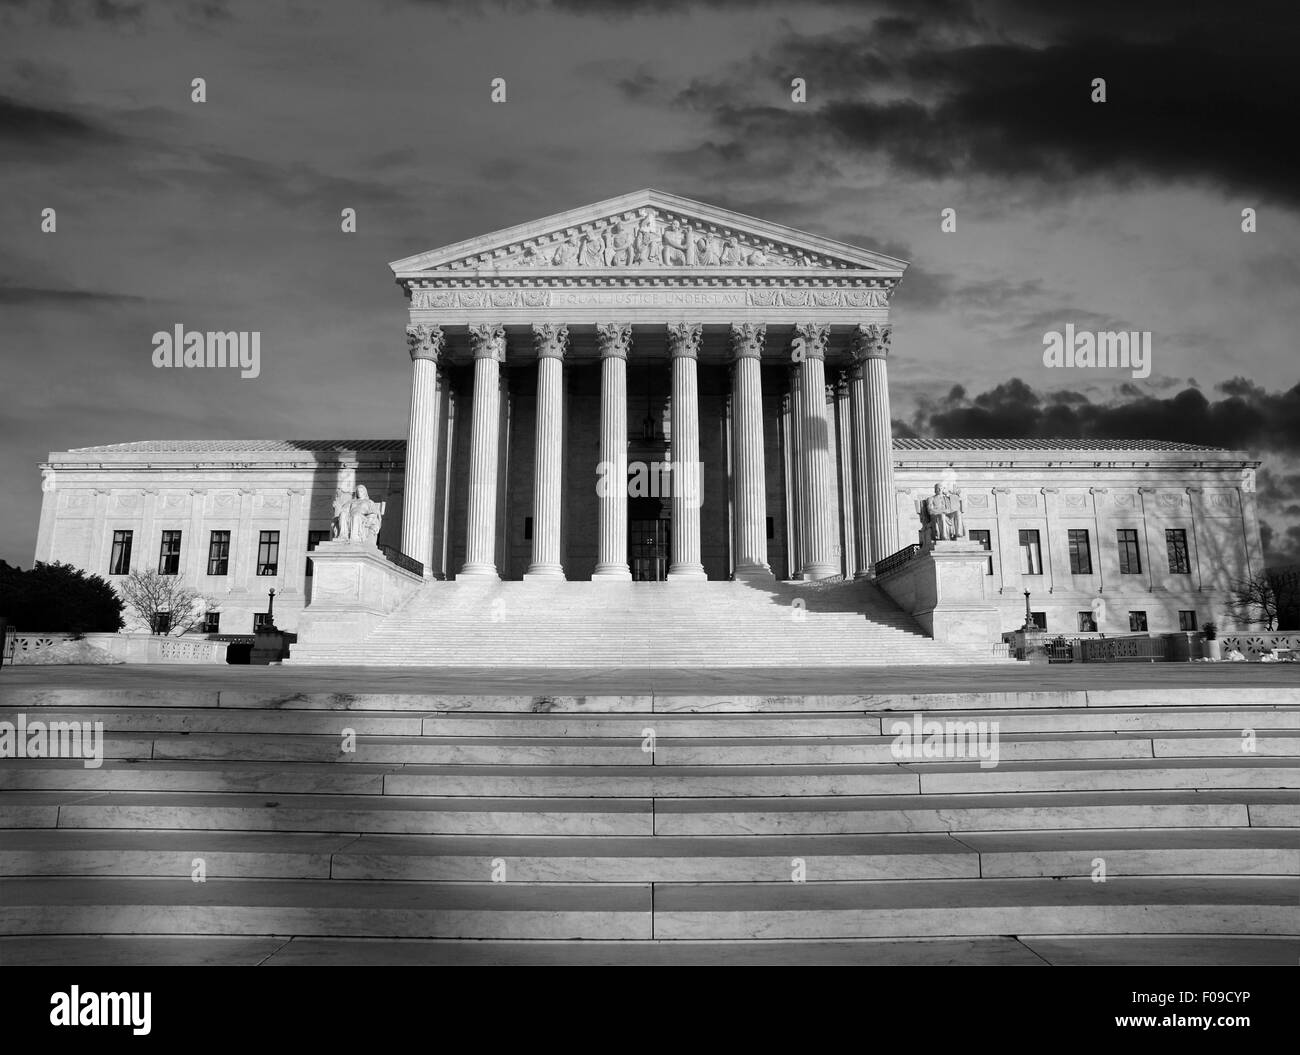 Clearing morning storm sky with the United States Supreme Court building in black and white. Stock Photo